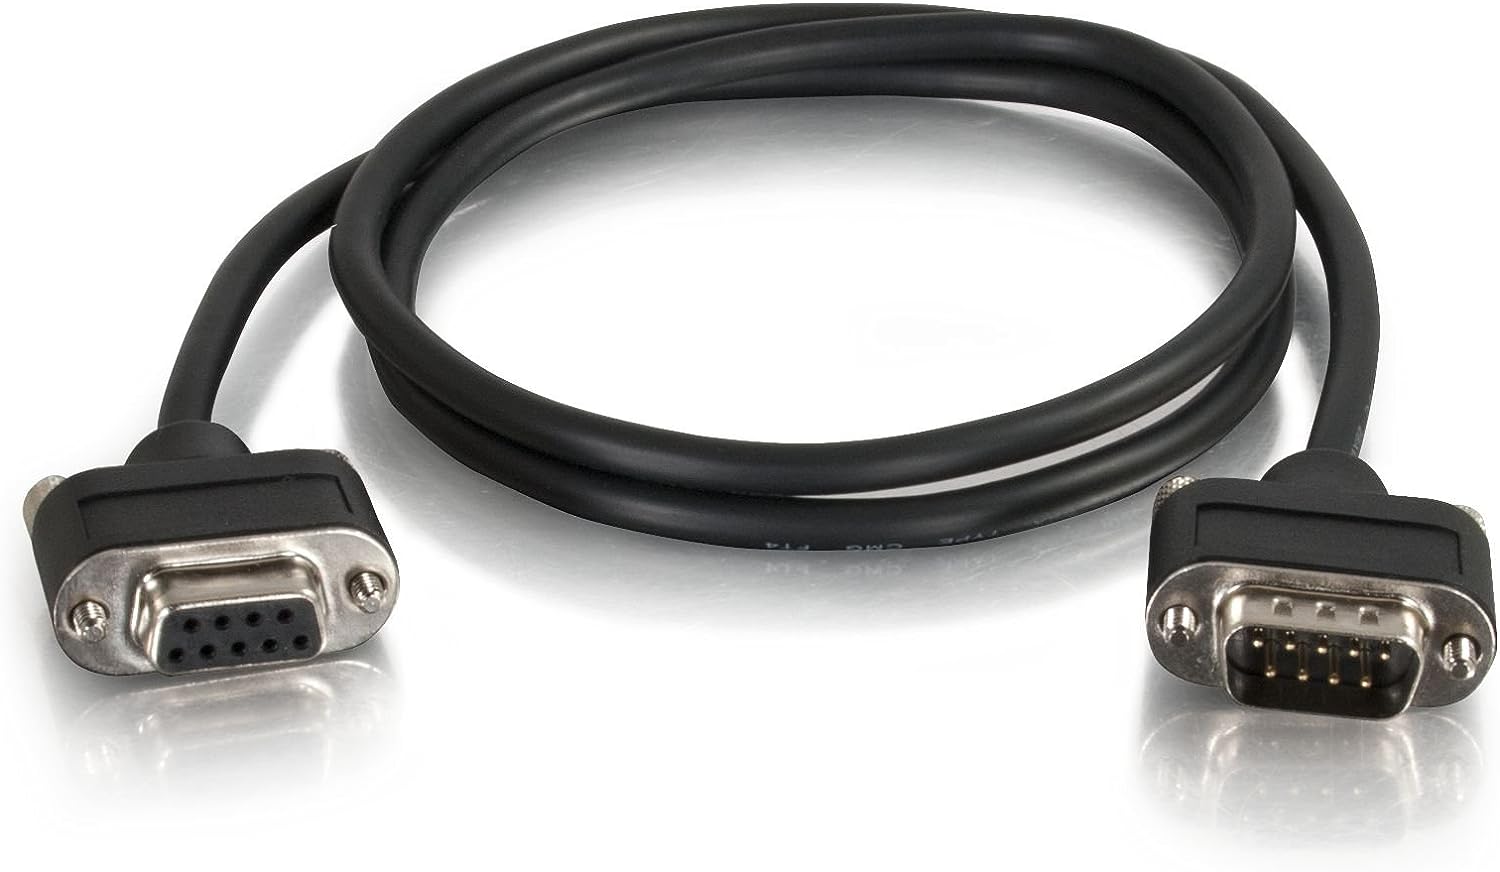 C2G 52183 Serial RS232 DB9 Null Modem Cable with Low Profile Connectors M/F, In-Wall CMG-Rated, Black (3 Feet, 0.91 Meters)